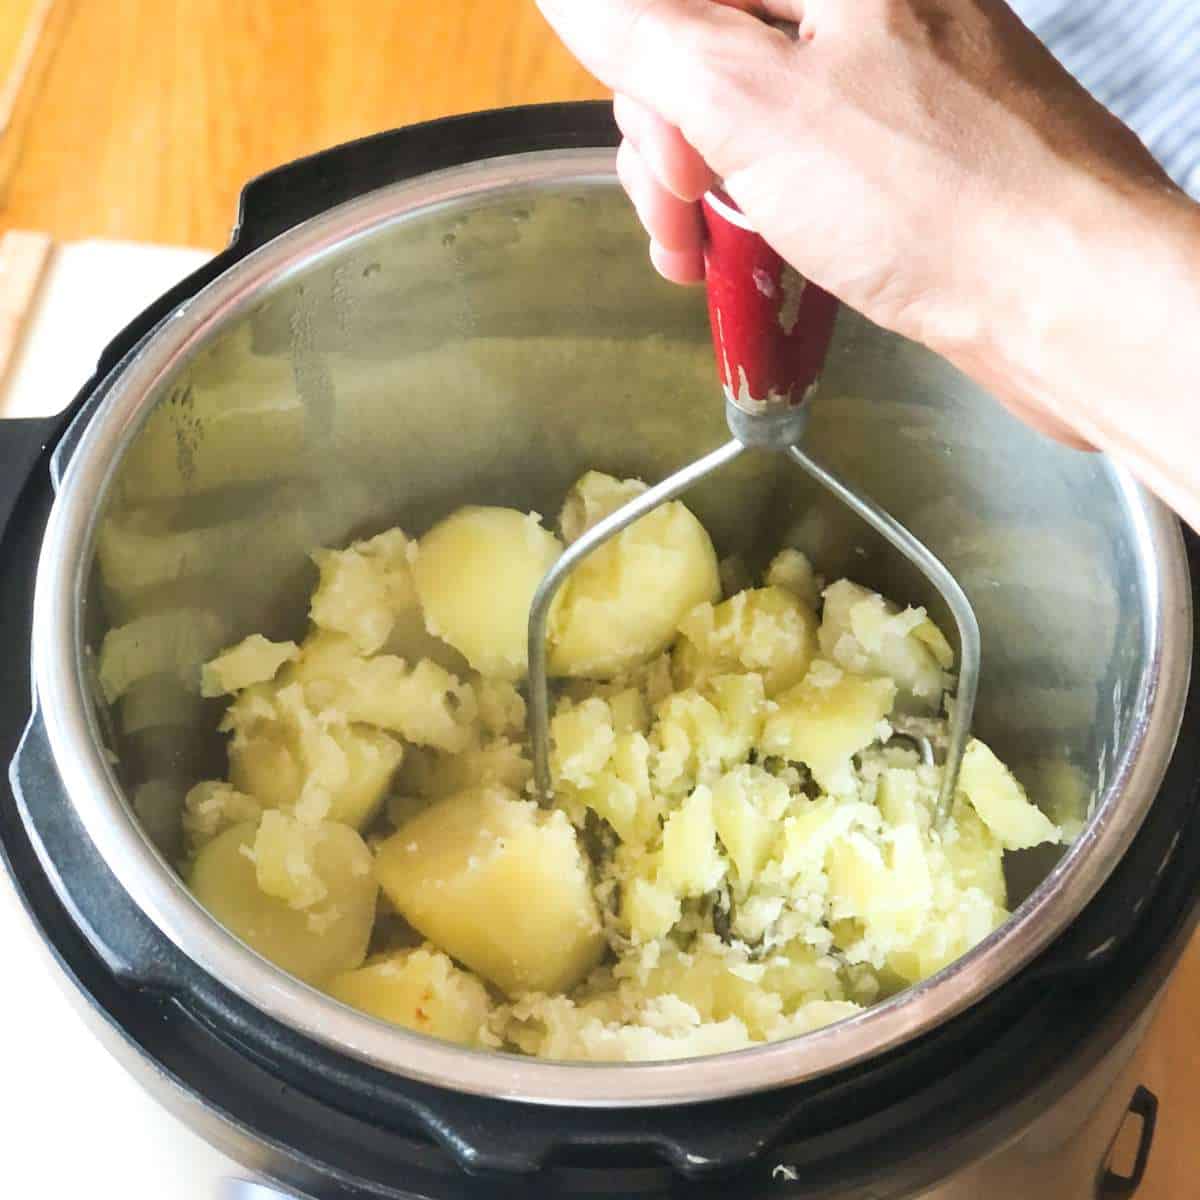 Cooked potatoes being mashed in a pressure cooker pot.